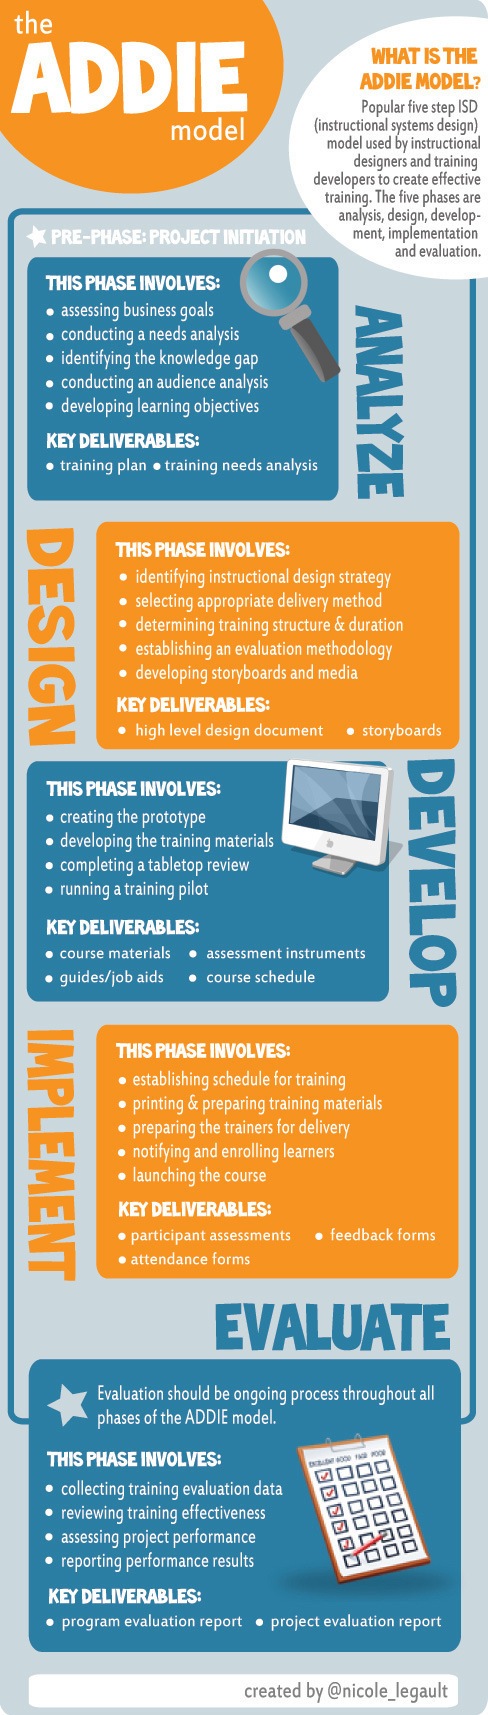 The-ADDIE-Instructional-Design-Model-Infographic